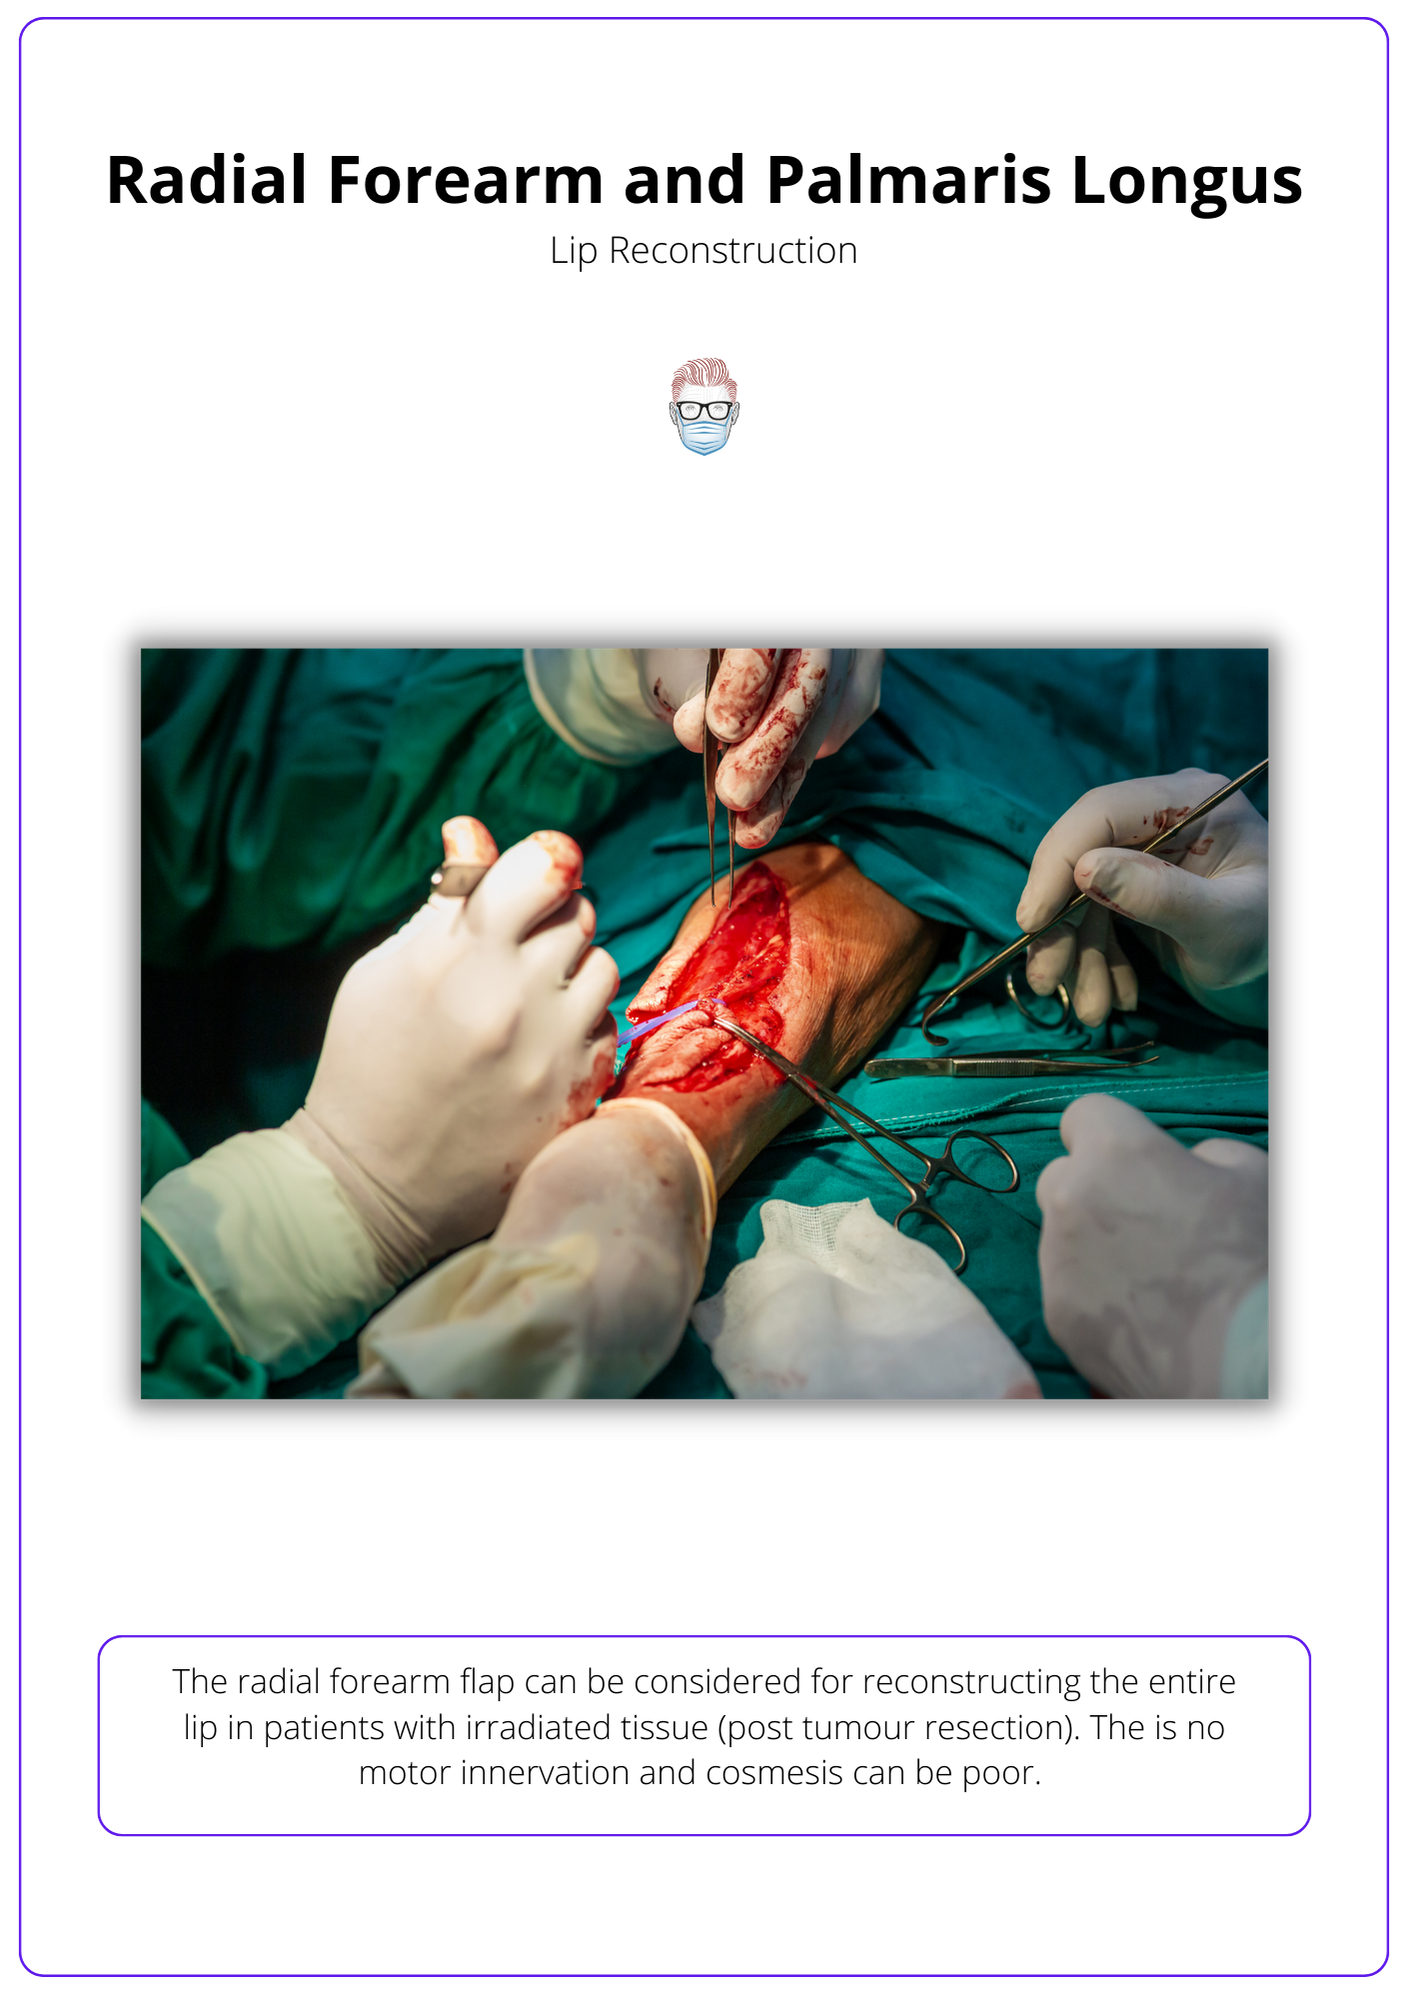 An intra-operative picture of a radial forearm flap being raised. The surgeons are in green and the patient has blood on their arm. This is for a lip reconstruction